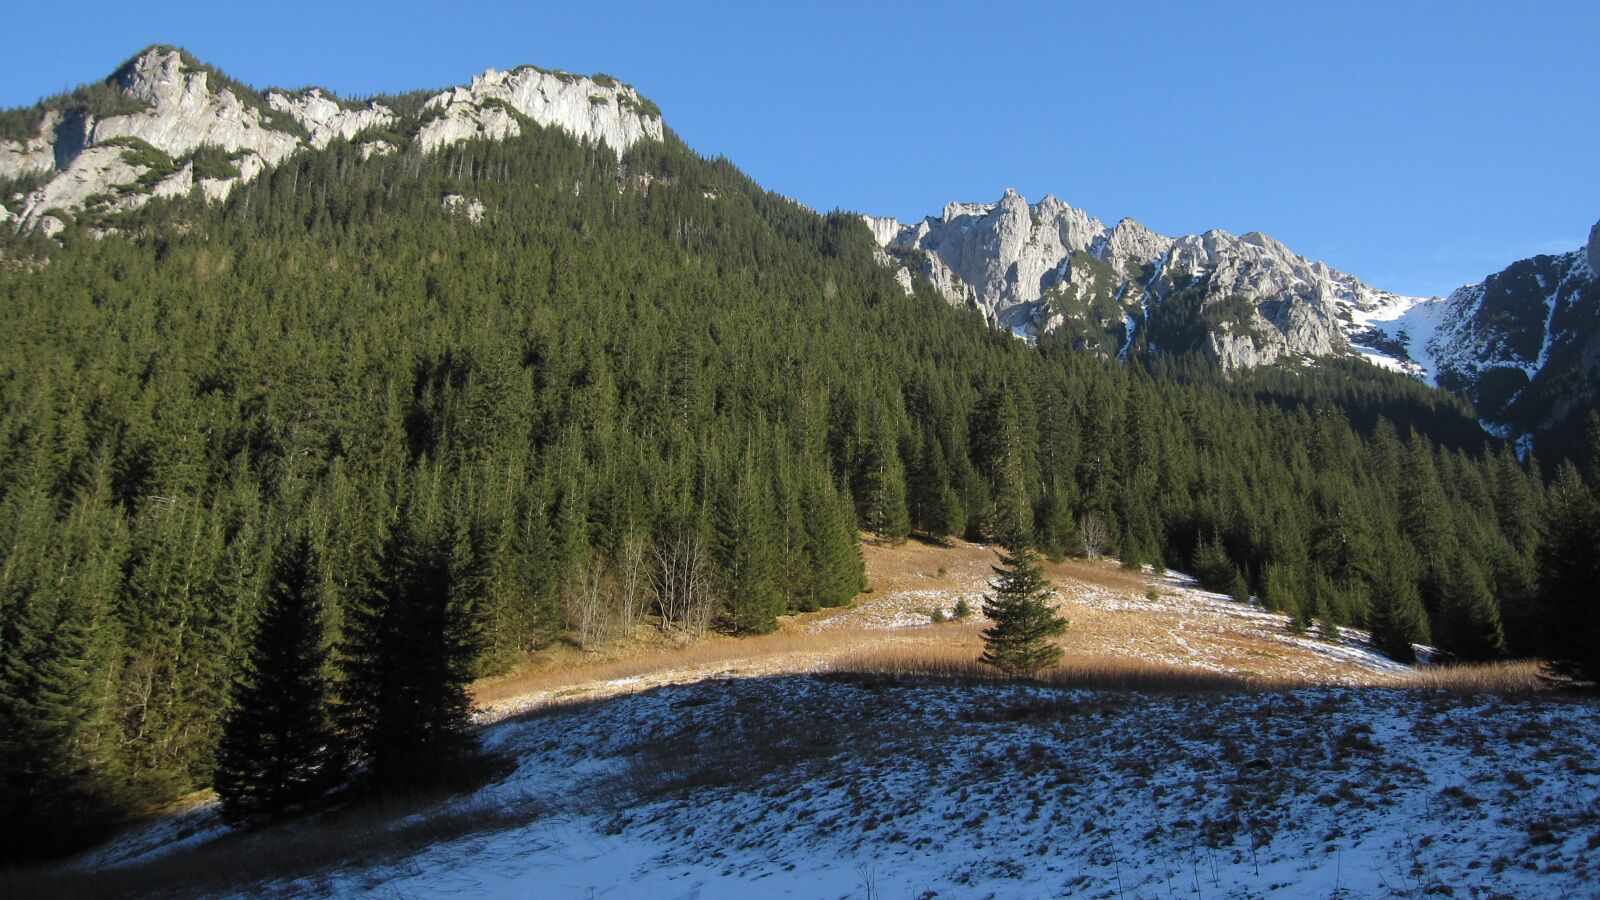 Canon PowerShot SD880 IS (Digital IXUS 870 IS / IXY Digital 920 IS) sample photo. Mountains, tatry, nature photography